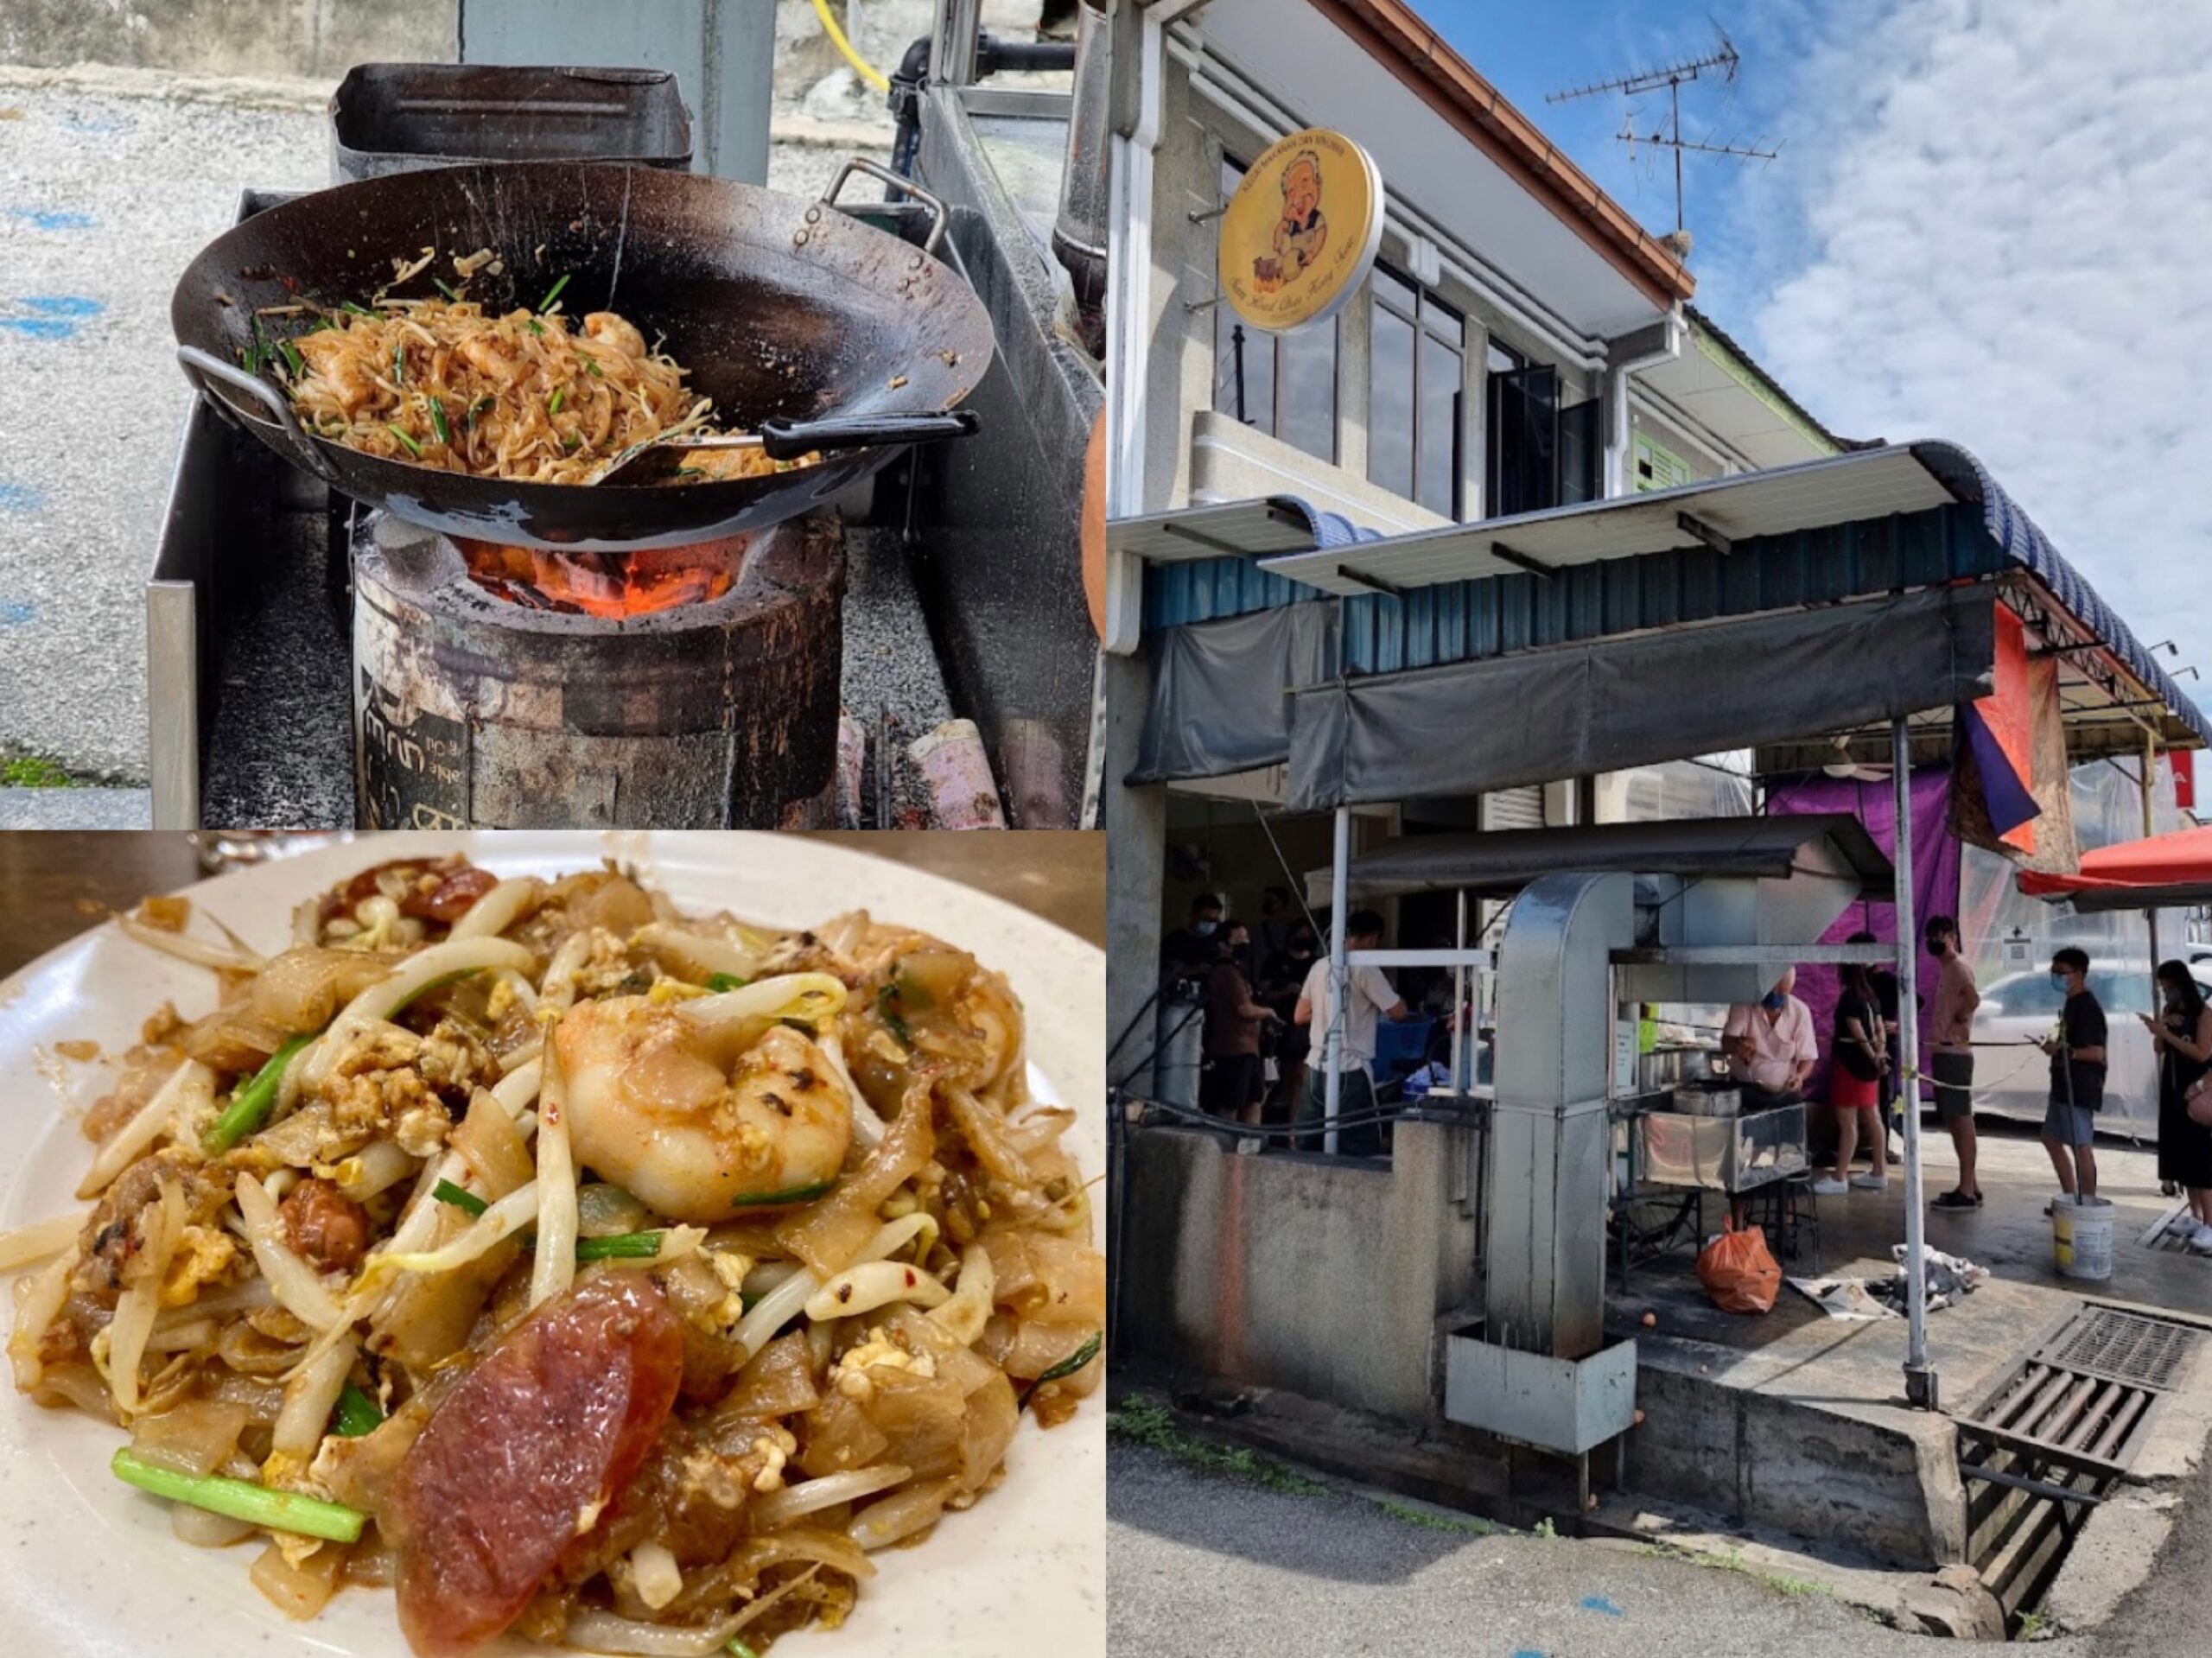 Penang char kuey teow Siam Road Charcoal Char Koay Teow